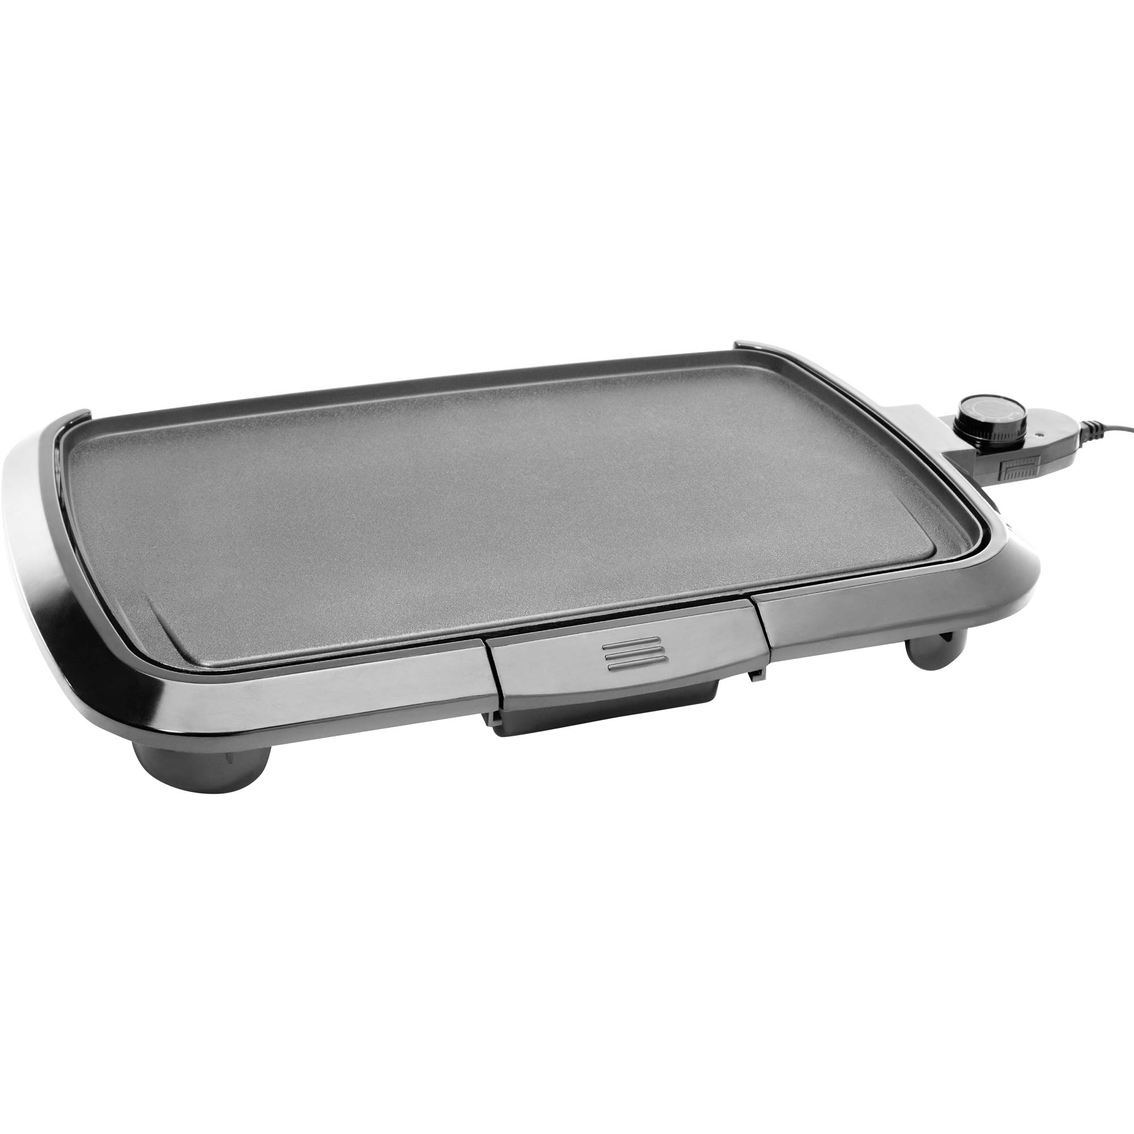 Chefman Portable Compact Grill, Dual Use Electric Grill Griddle, Nonstick,  Black